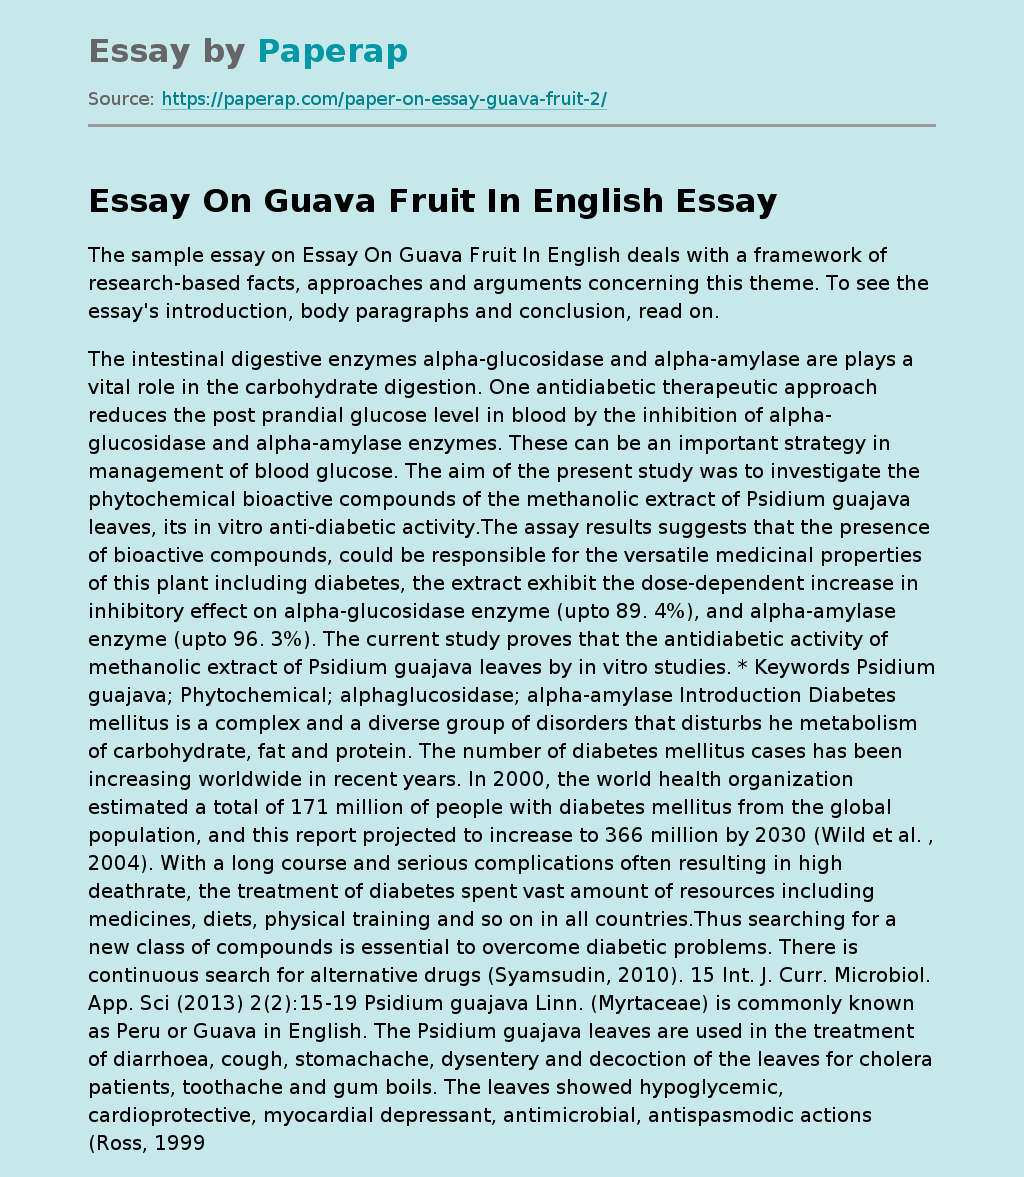 Essay On Guava Fruit In English